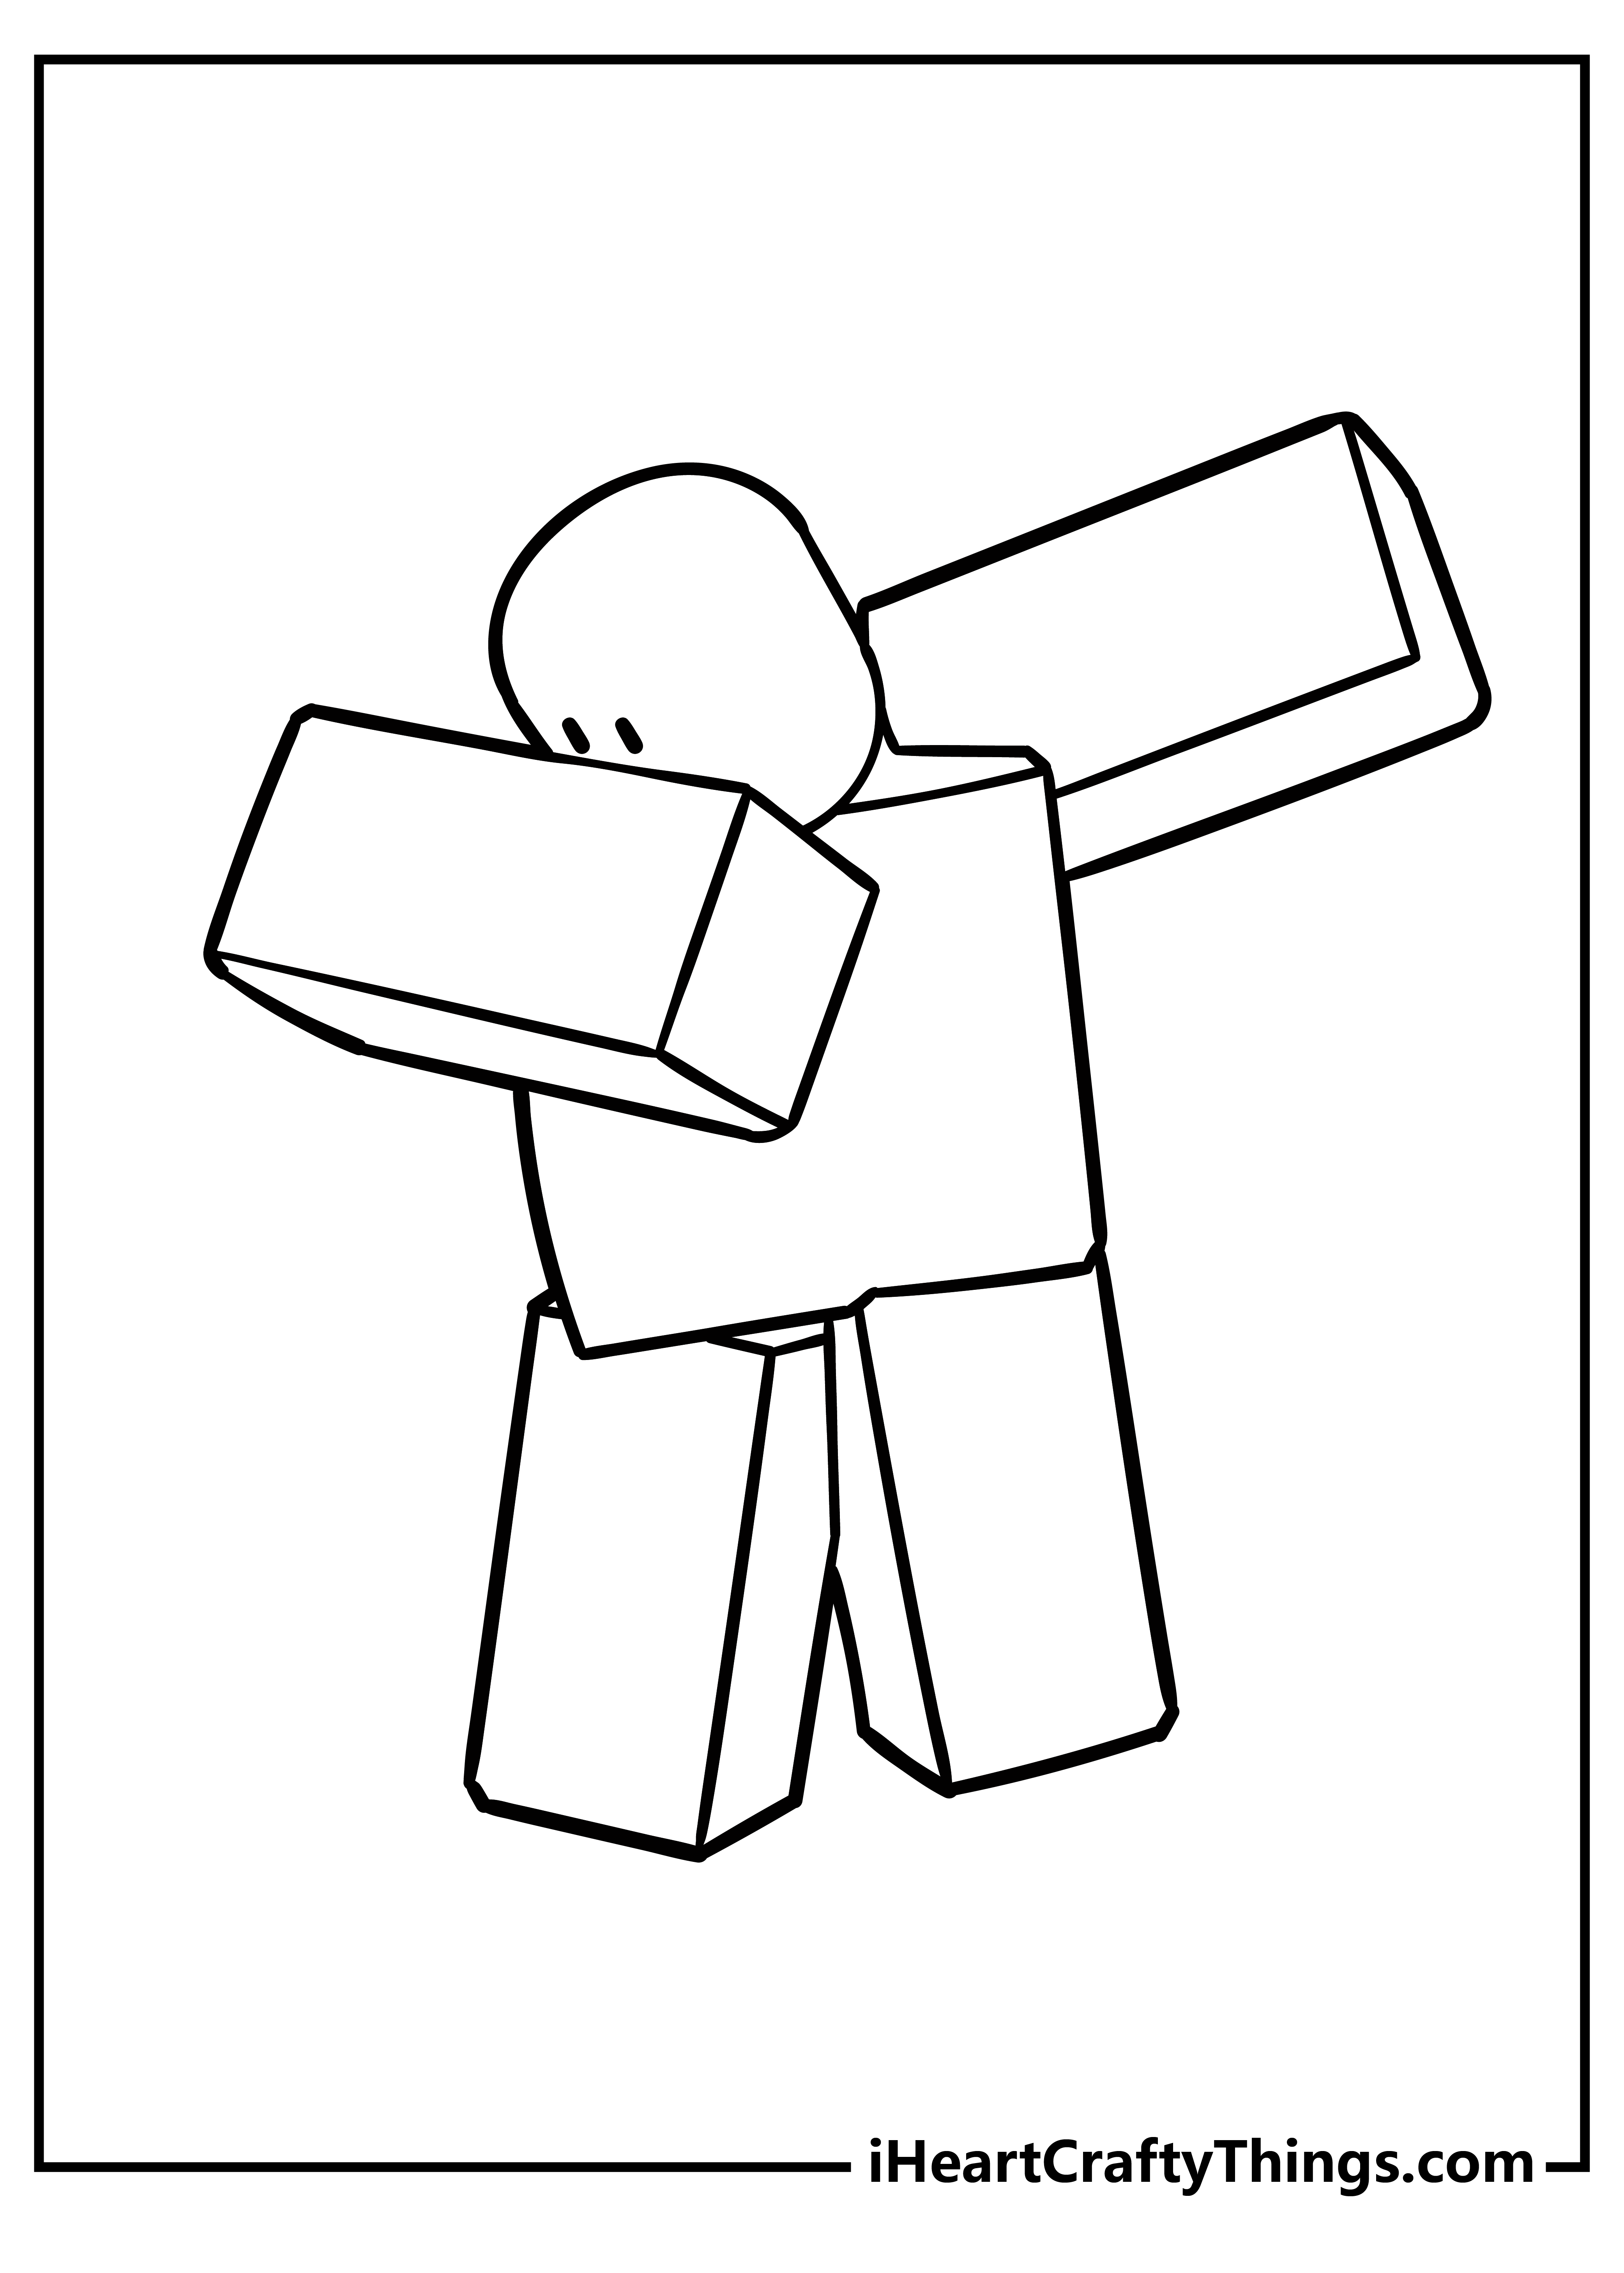 Roblox coloring pages free printables